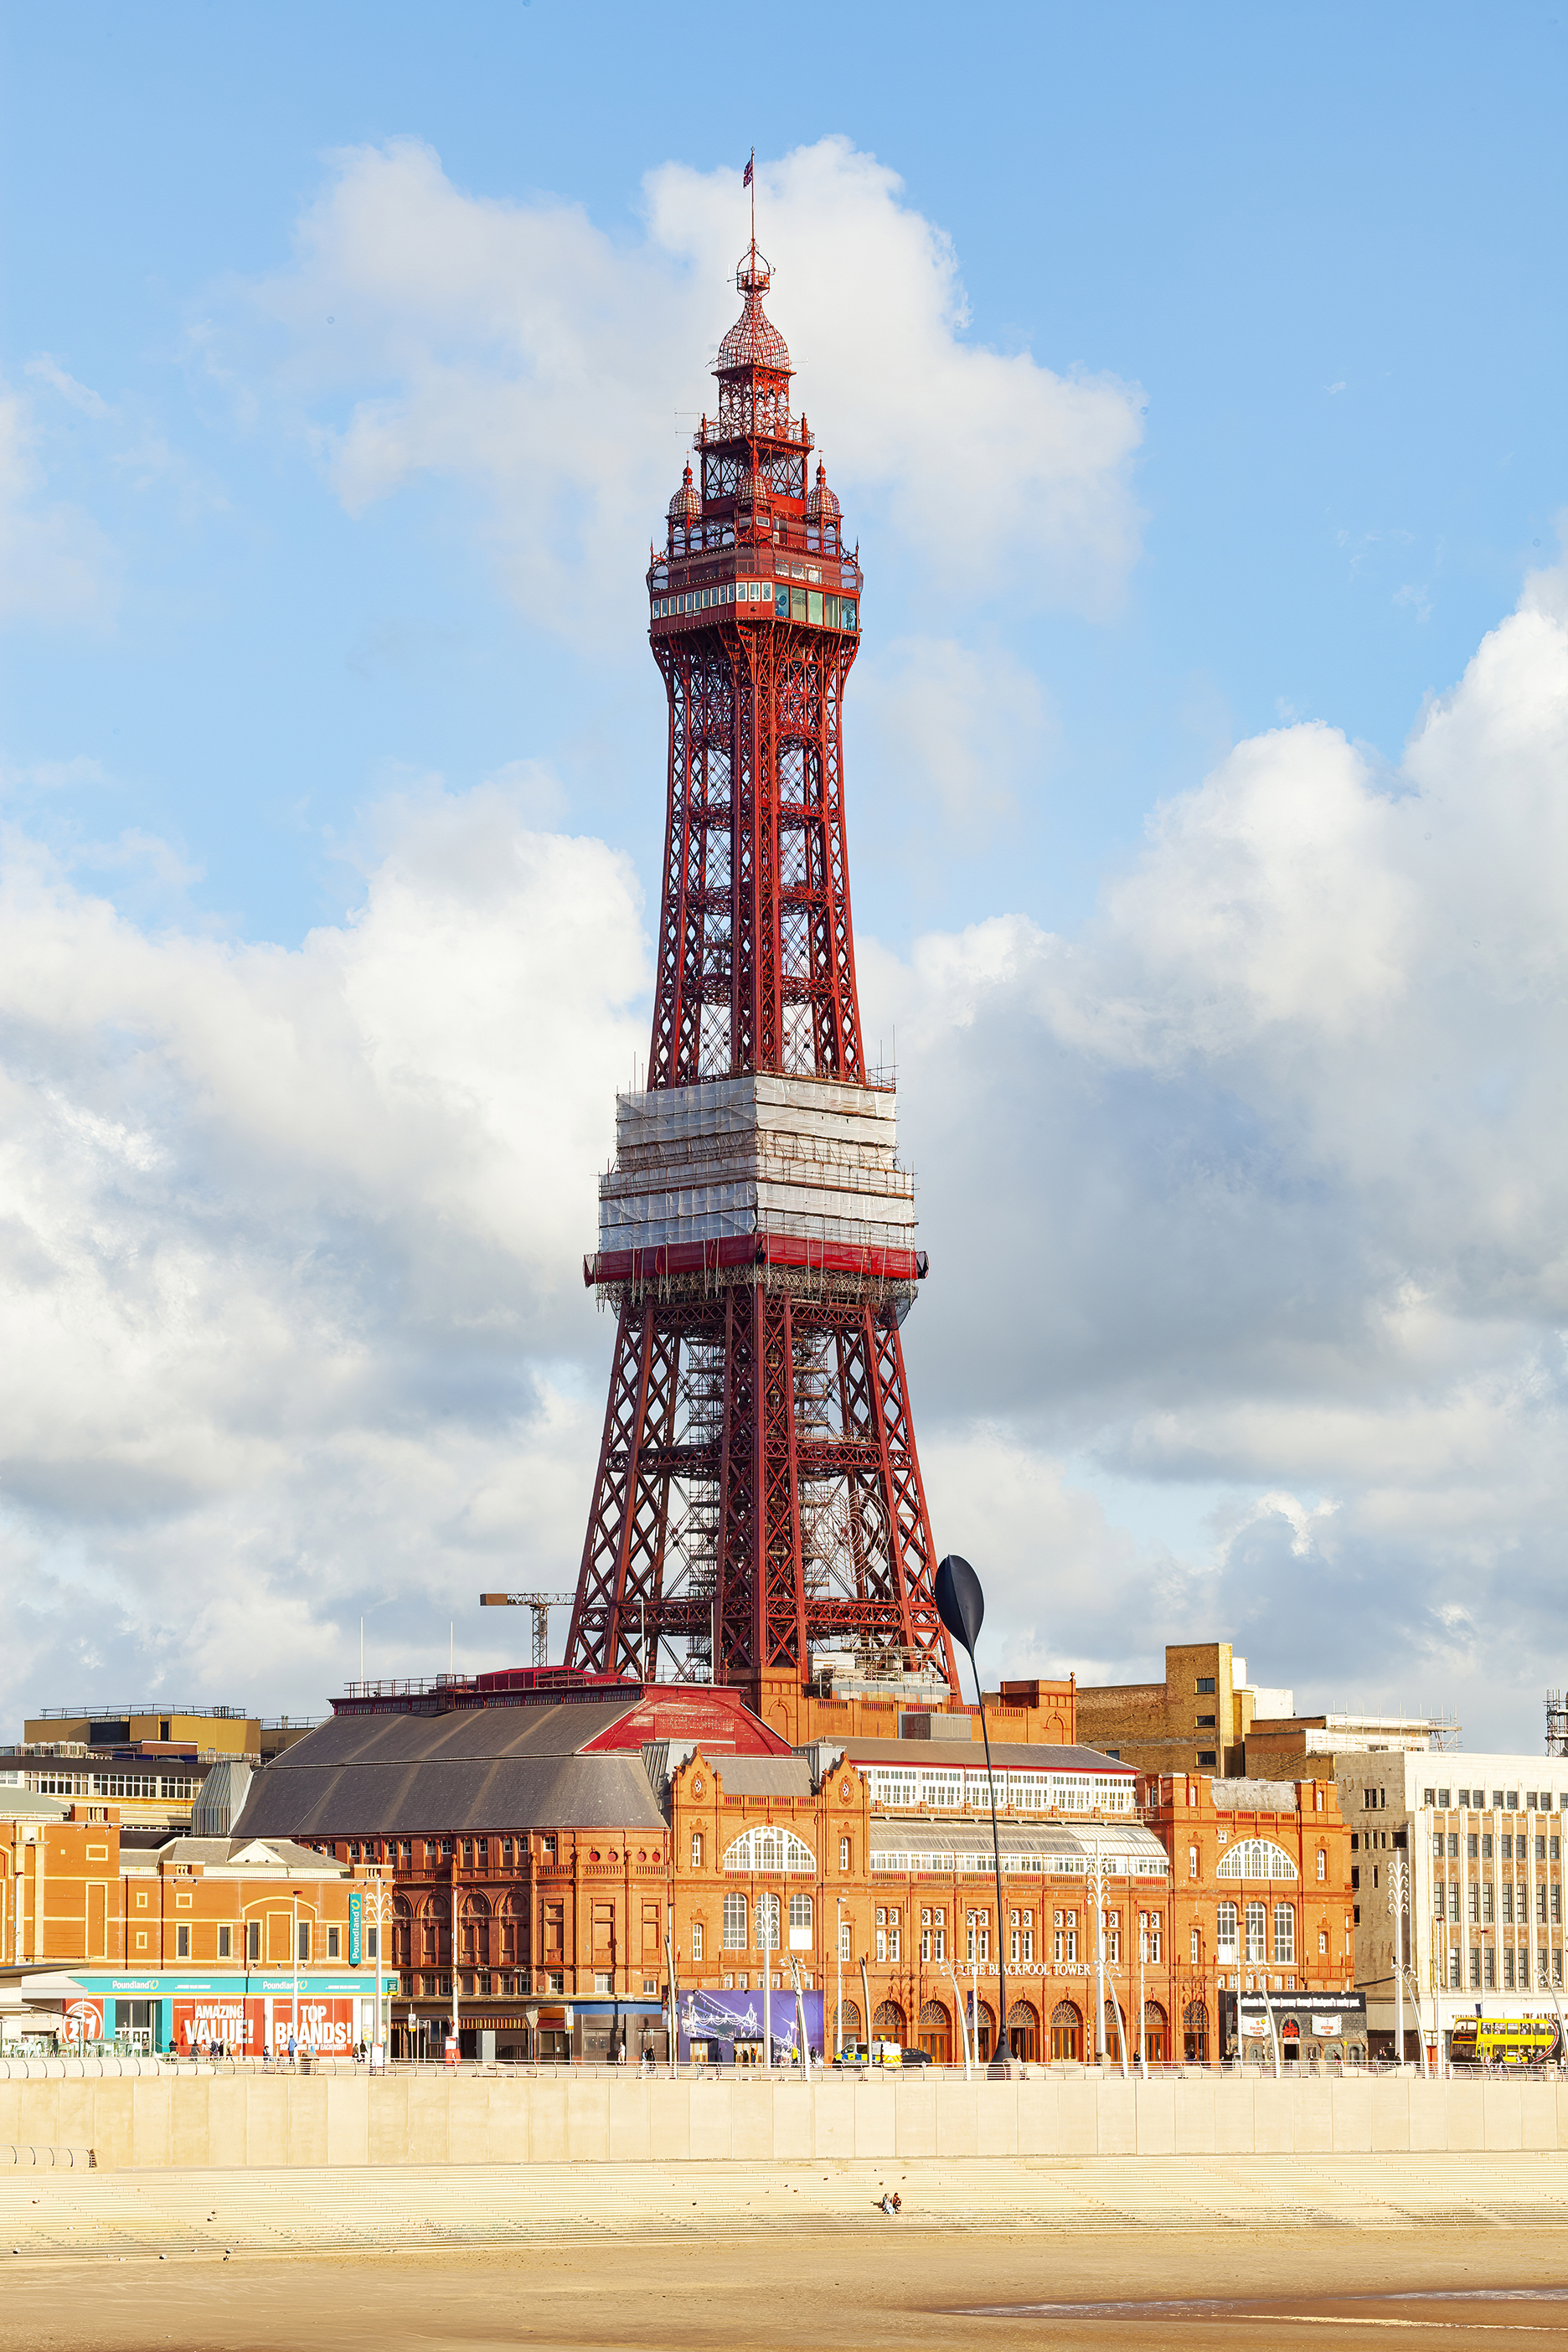 Iconic places UK Blackpool tower viewed from the North Pier England United Kingdom Jul 2015 01